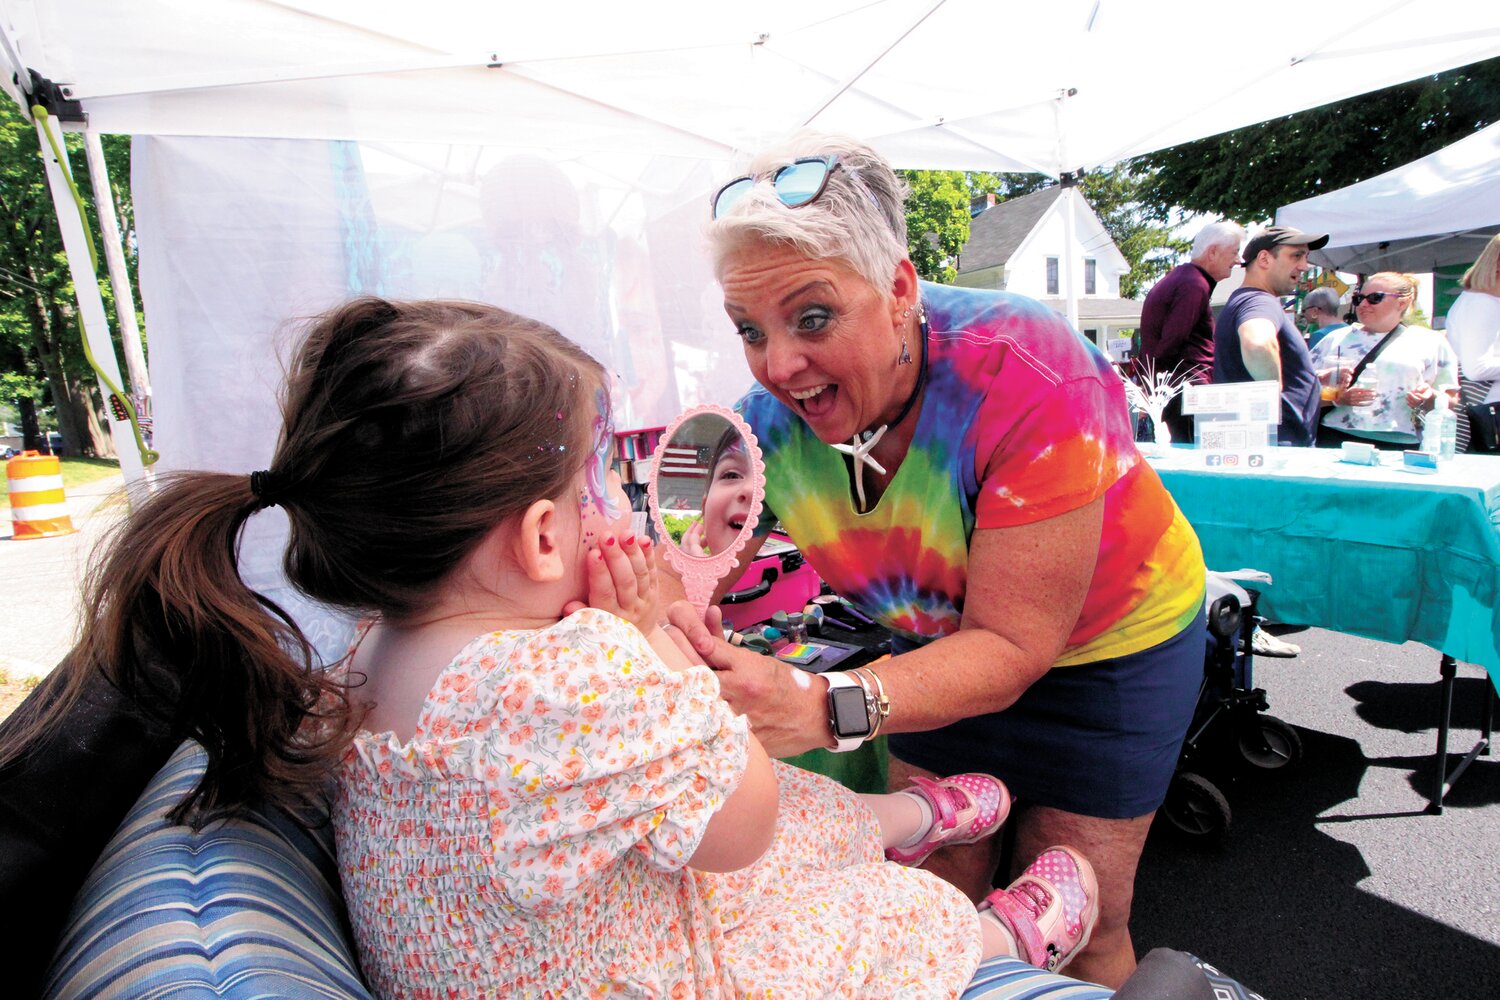 ALWAYS POPULAR: At right Toni Andersen of Warwick  barely paused from the moment the Gaspee Days Arts and Crafts officially opened Saturday morning. Her face paintings delighted kids of all ages including Violet who is pictured here. As typically the case, parents ask how they wash faces clean and kids protest when they learn they won’t last.